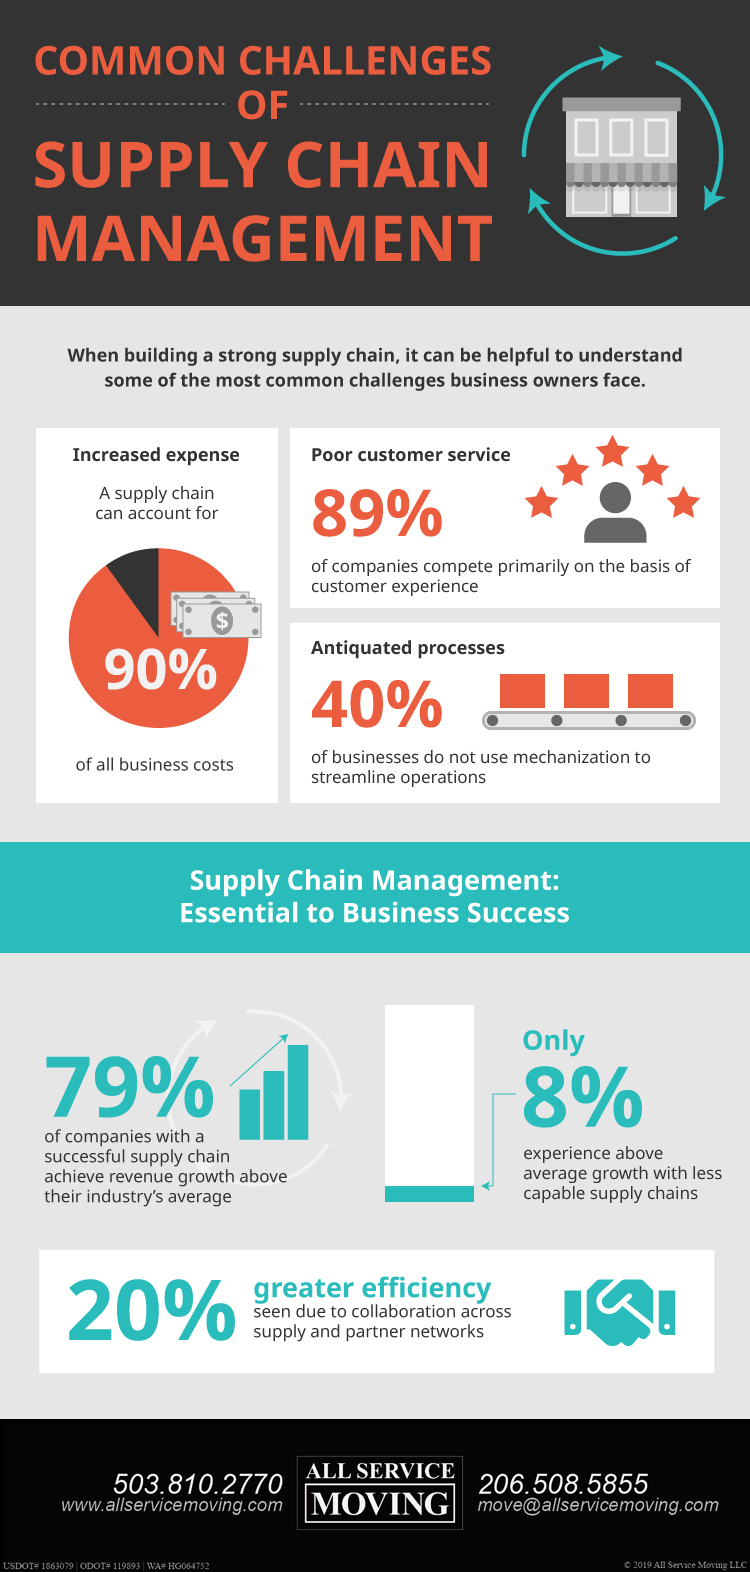 Challenges of Supply Chain Management